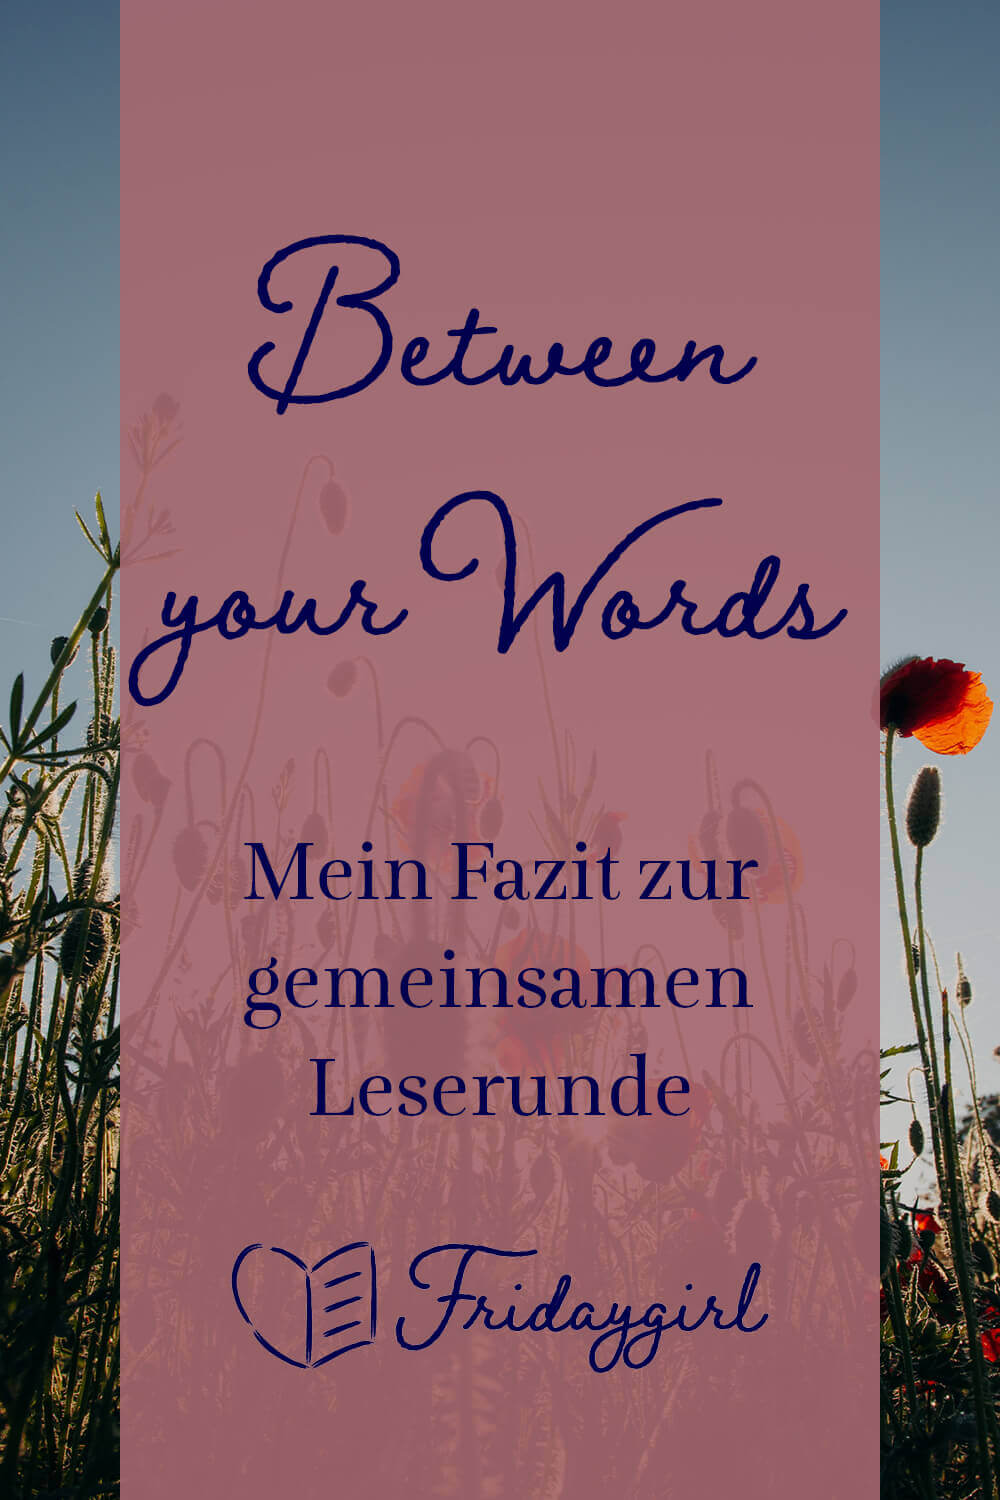 Leserunde Between your Words